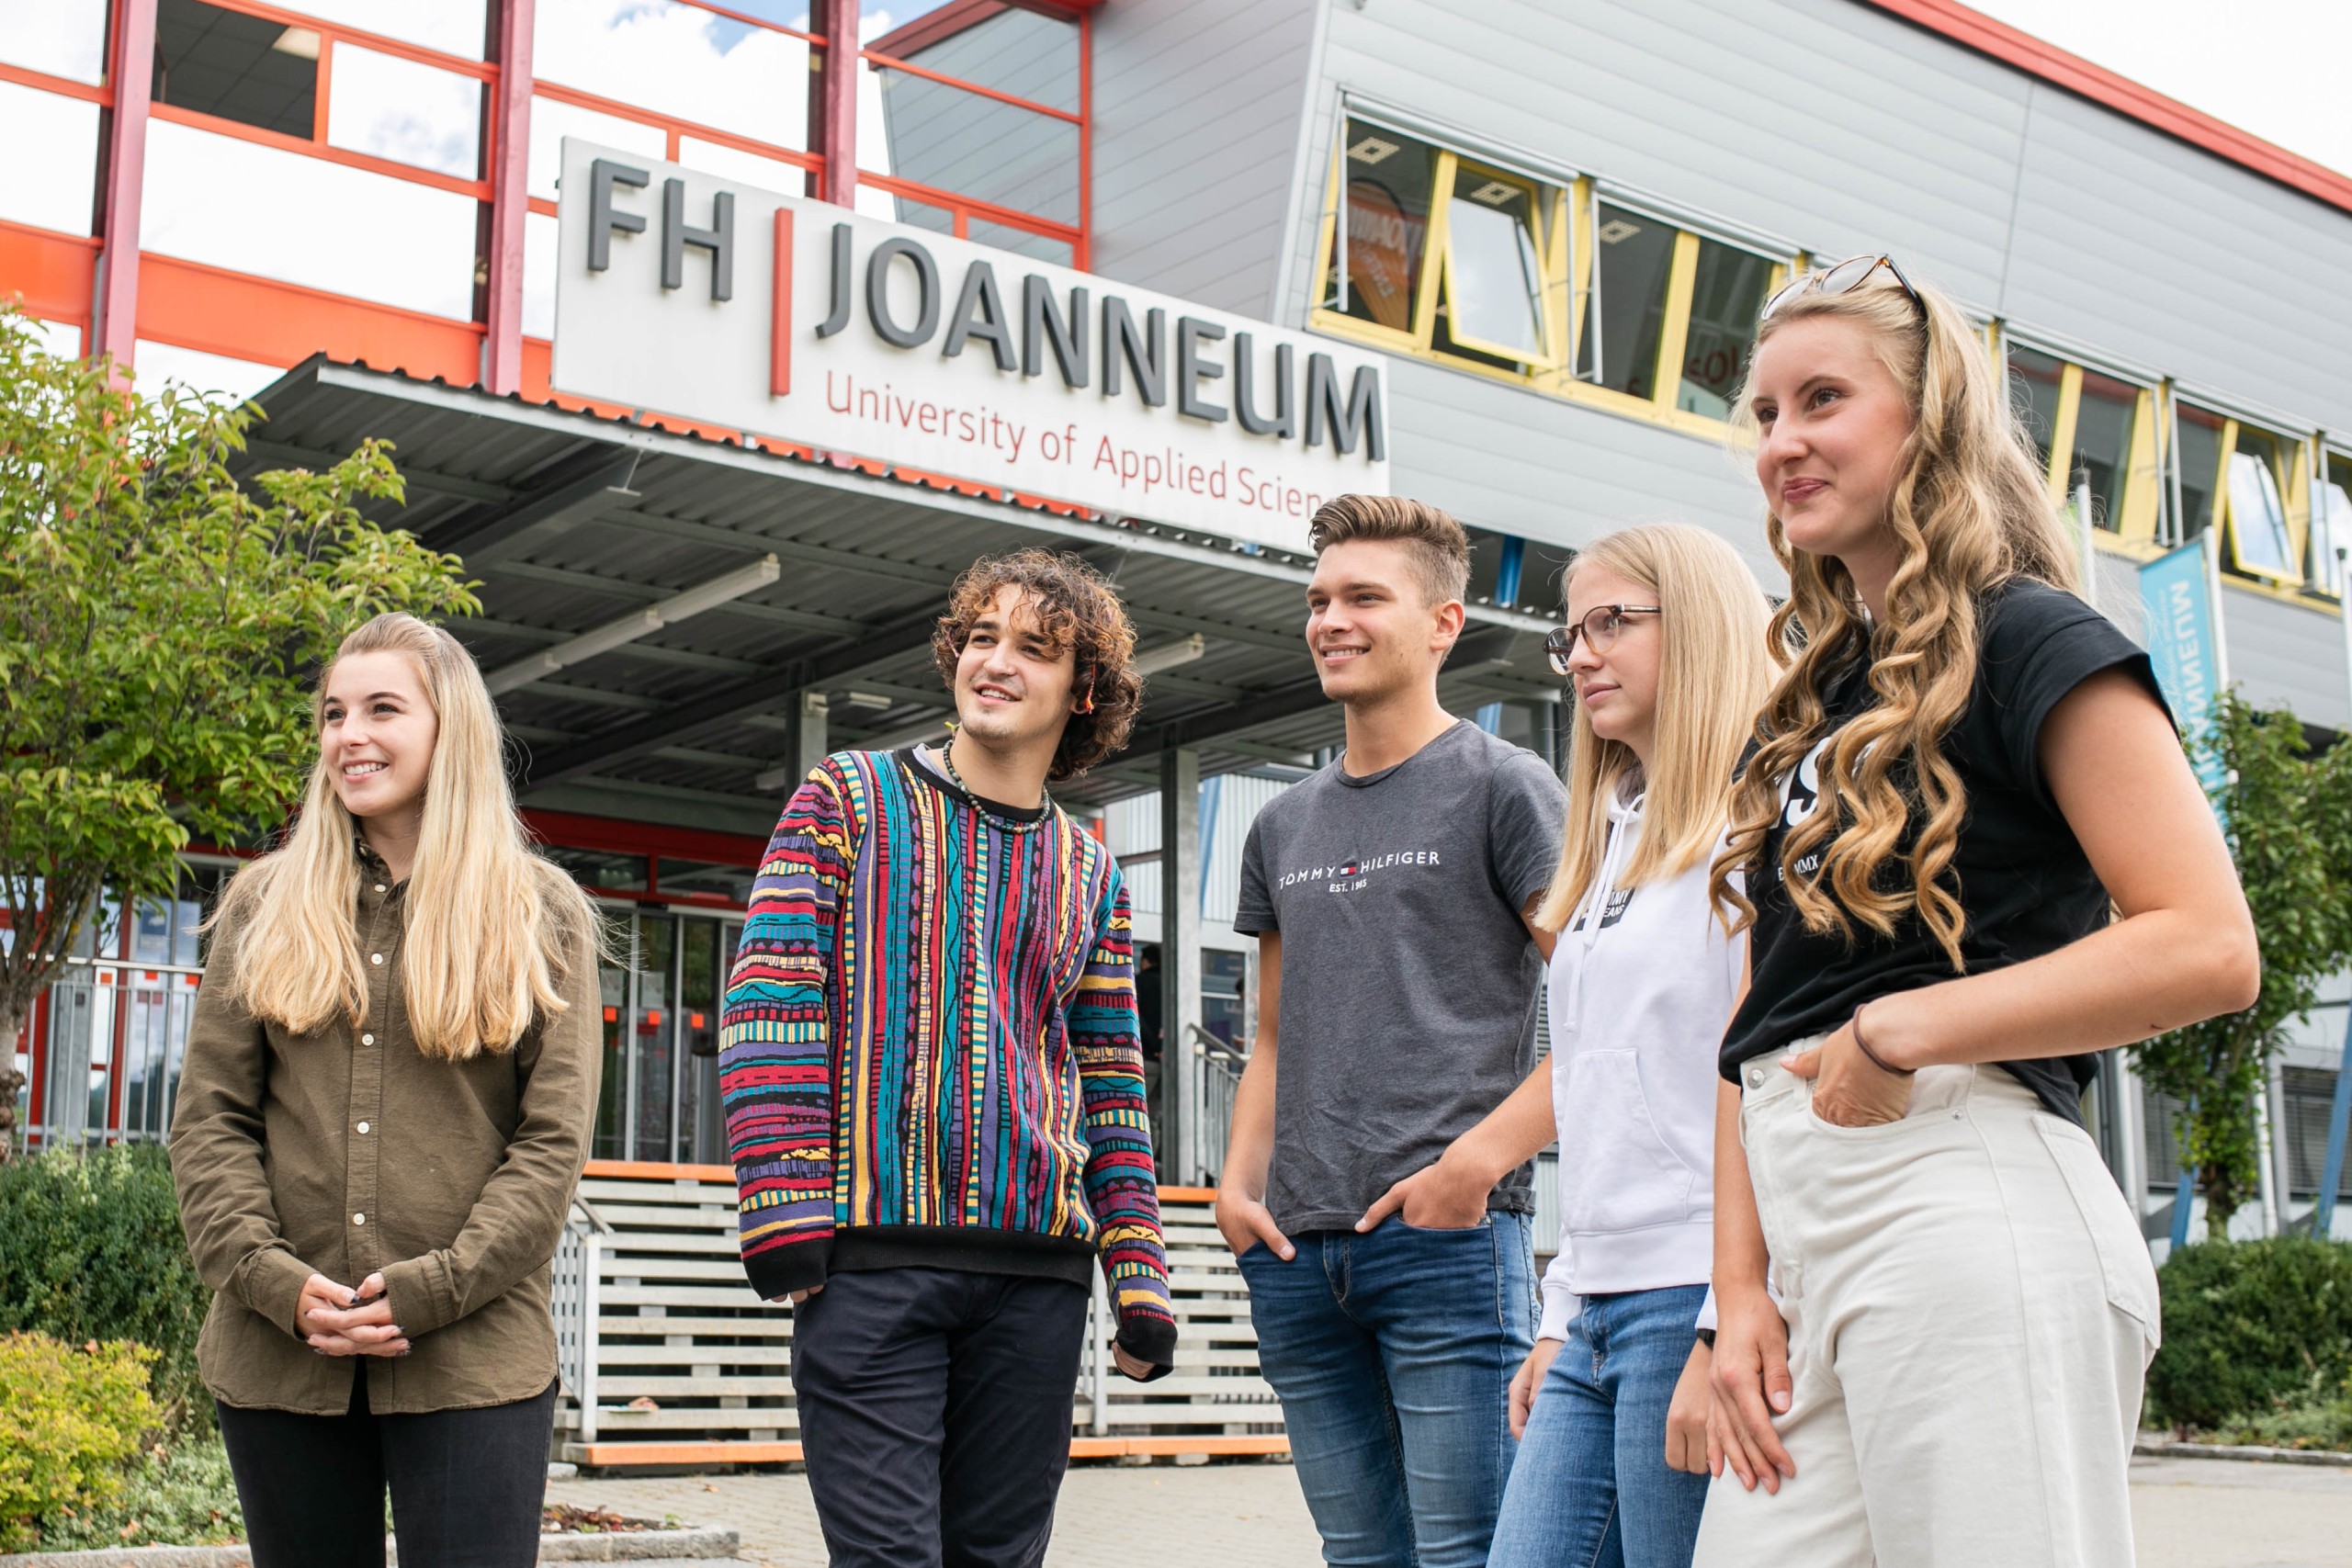 A sense of community is a key priority at FH JOANNEUM.